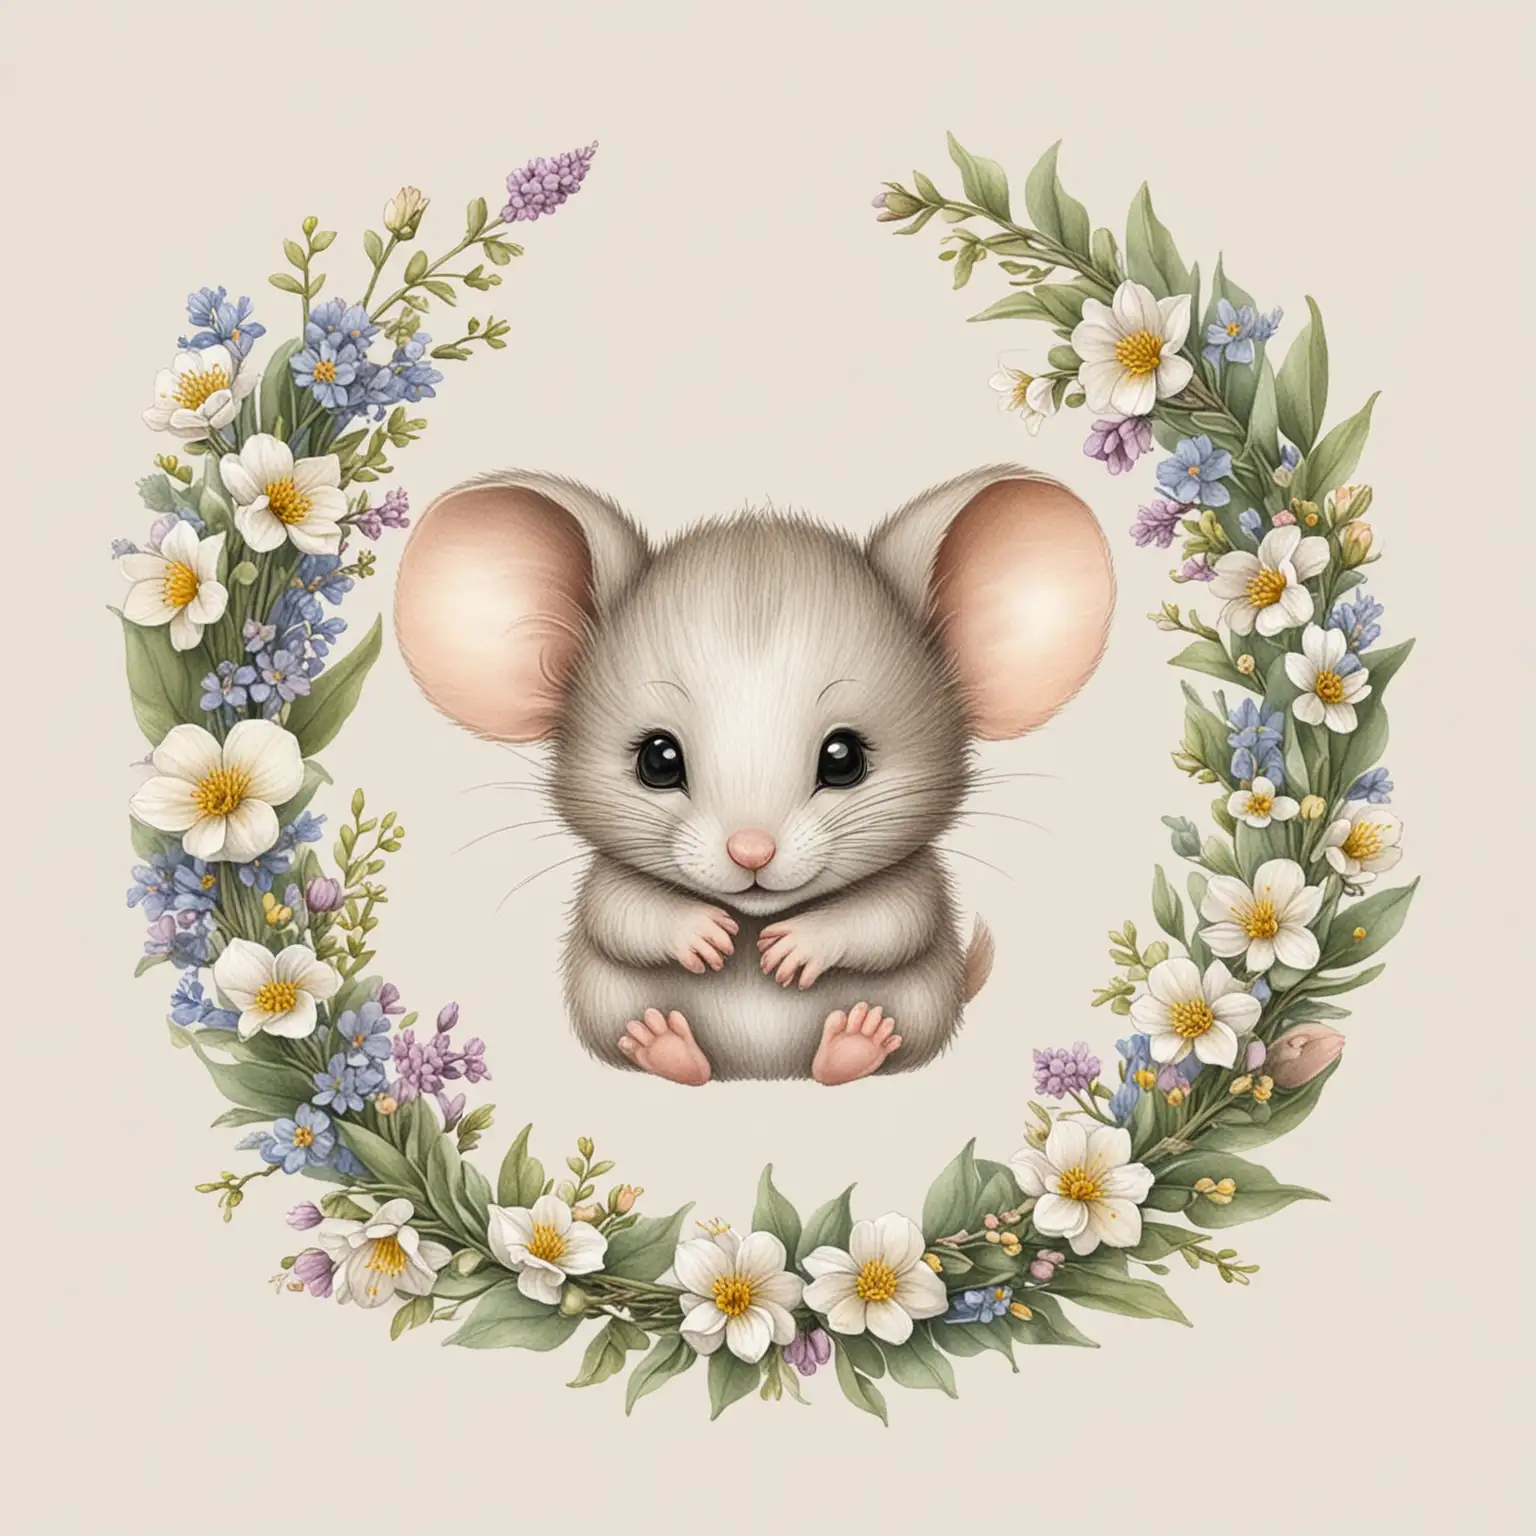 Adorable Baby Mouse Holding Spring Flowers Garland Neutral Clip Art